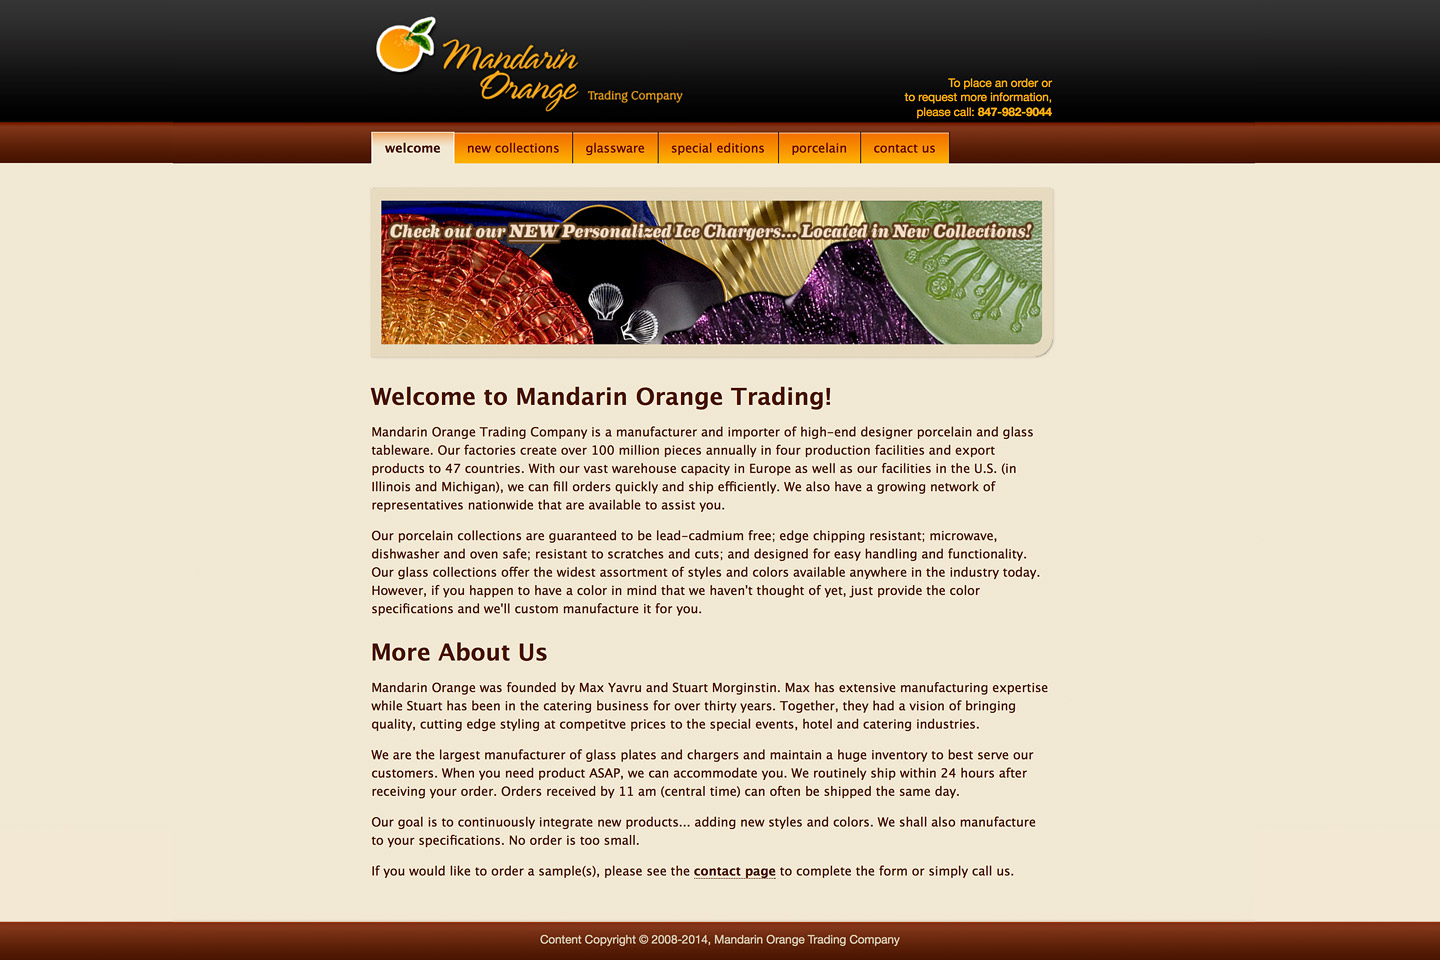 a screen capture of the mandarin orange trading company homepage, featuring an montage of various colorful charger plates